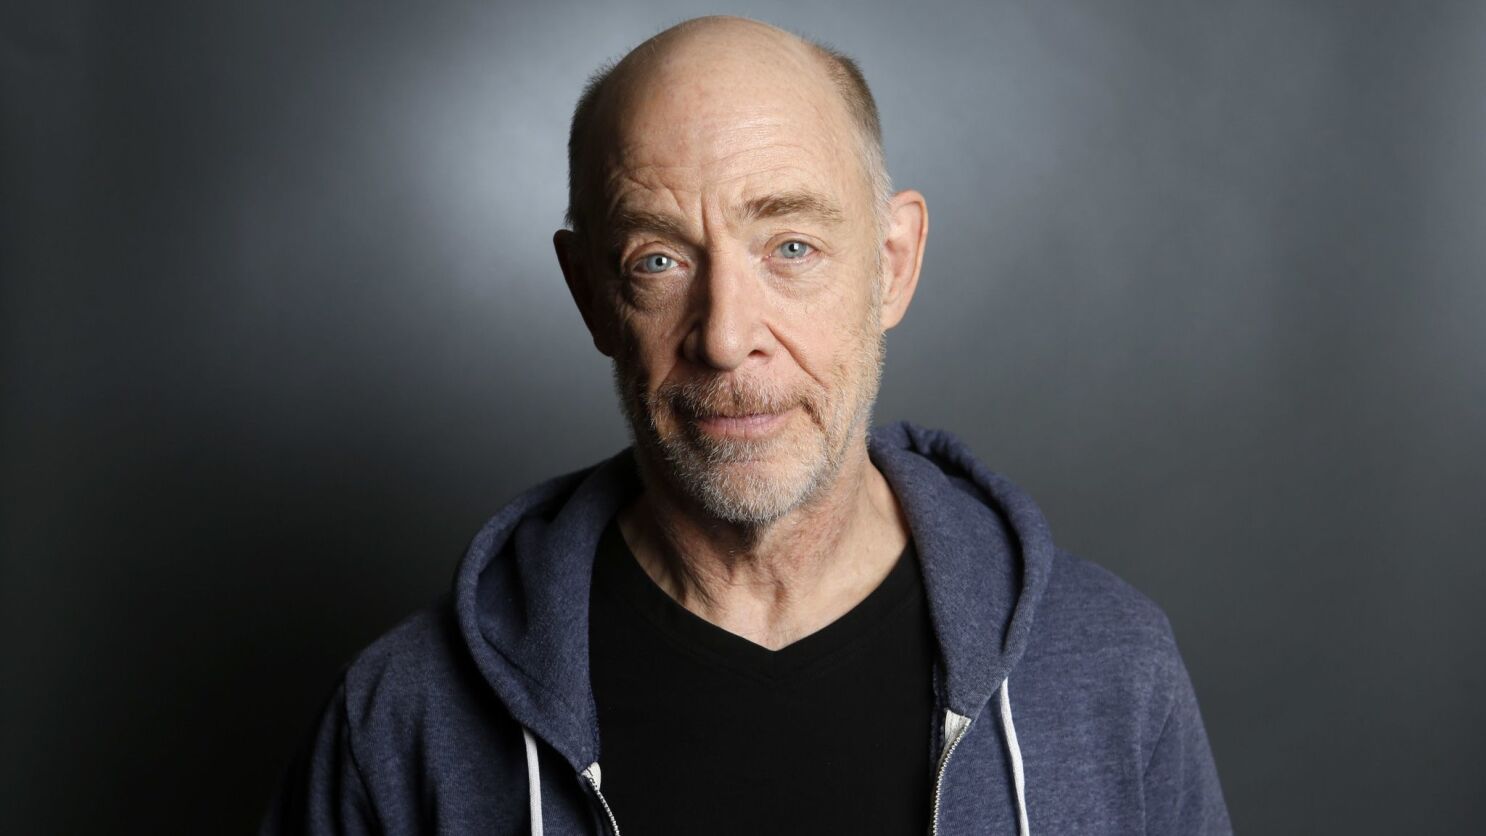 Oscar winner J.K. Simmons talks about his memorable roles, from 'Juno' to  'Whiplash' - Los Angeles Times